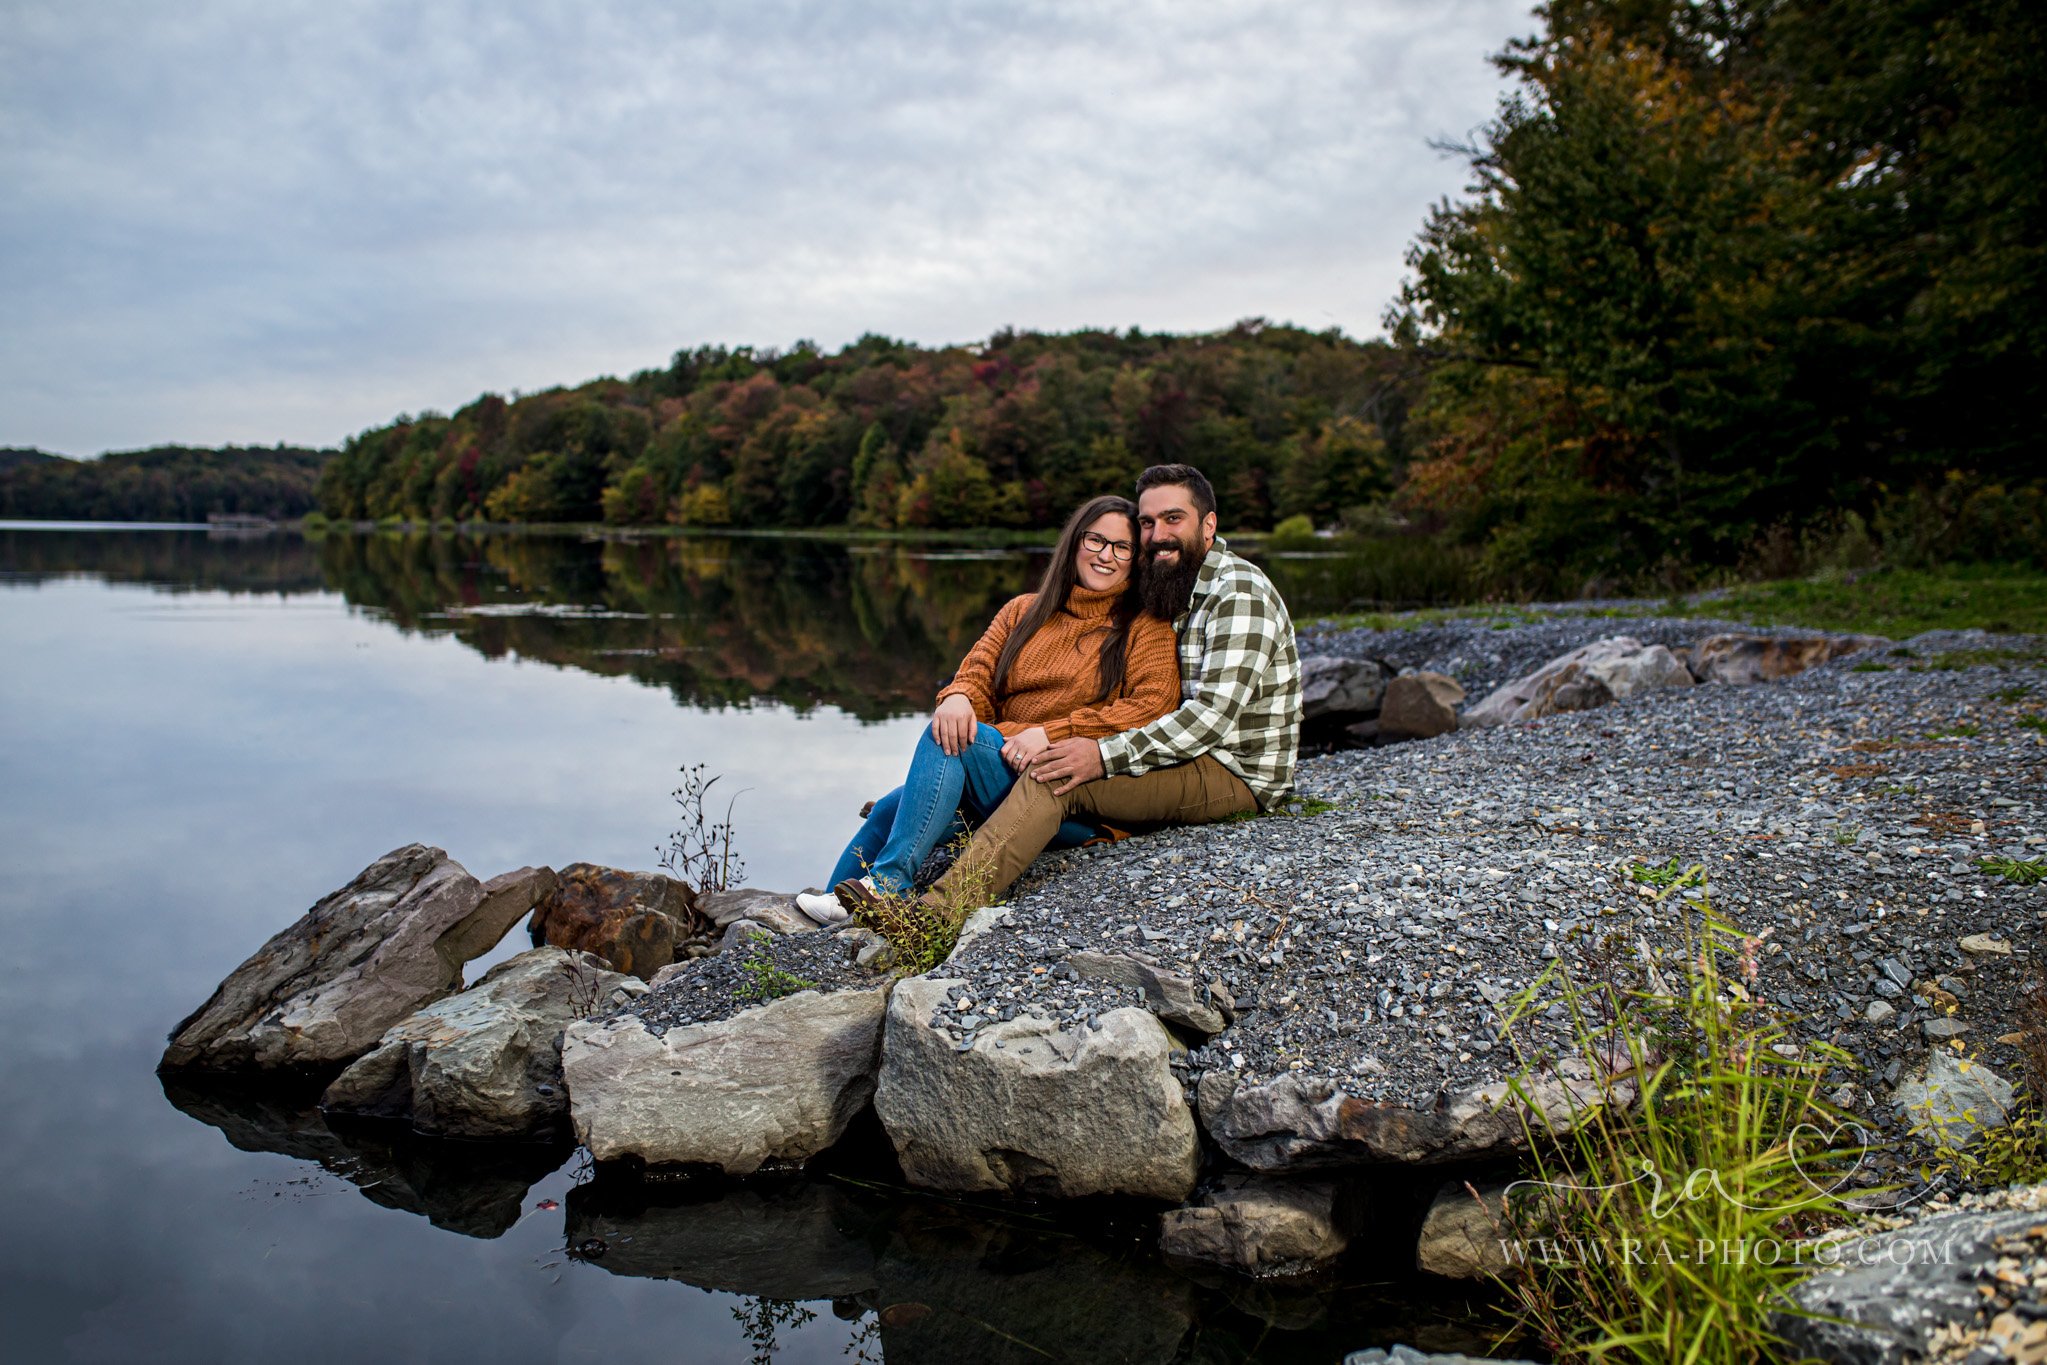 036-MGS-FALLS-CREEK-PA-ENGAGEMENT-PICTURES.jpg